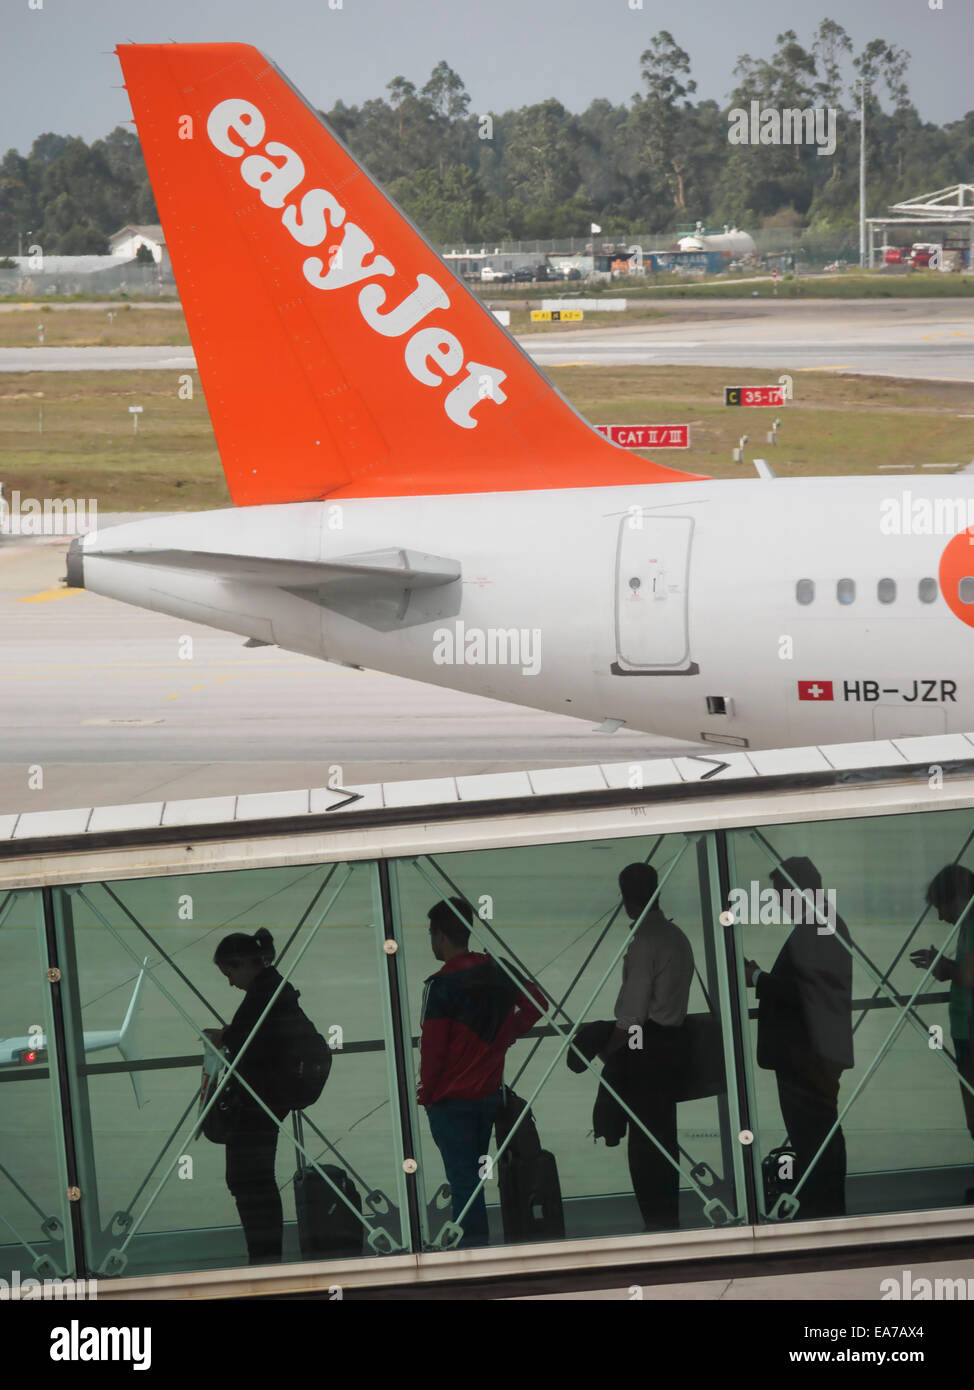 Passengers boarding next to easyJet airplane on an airport runway Stock Photo